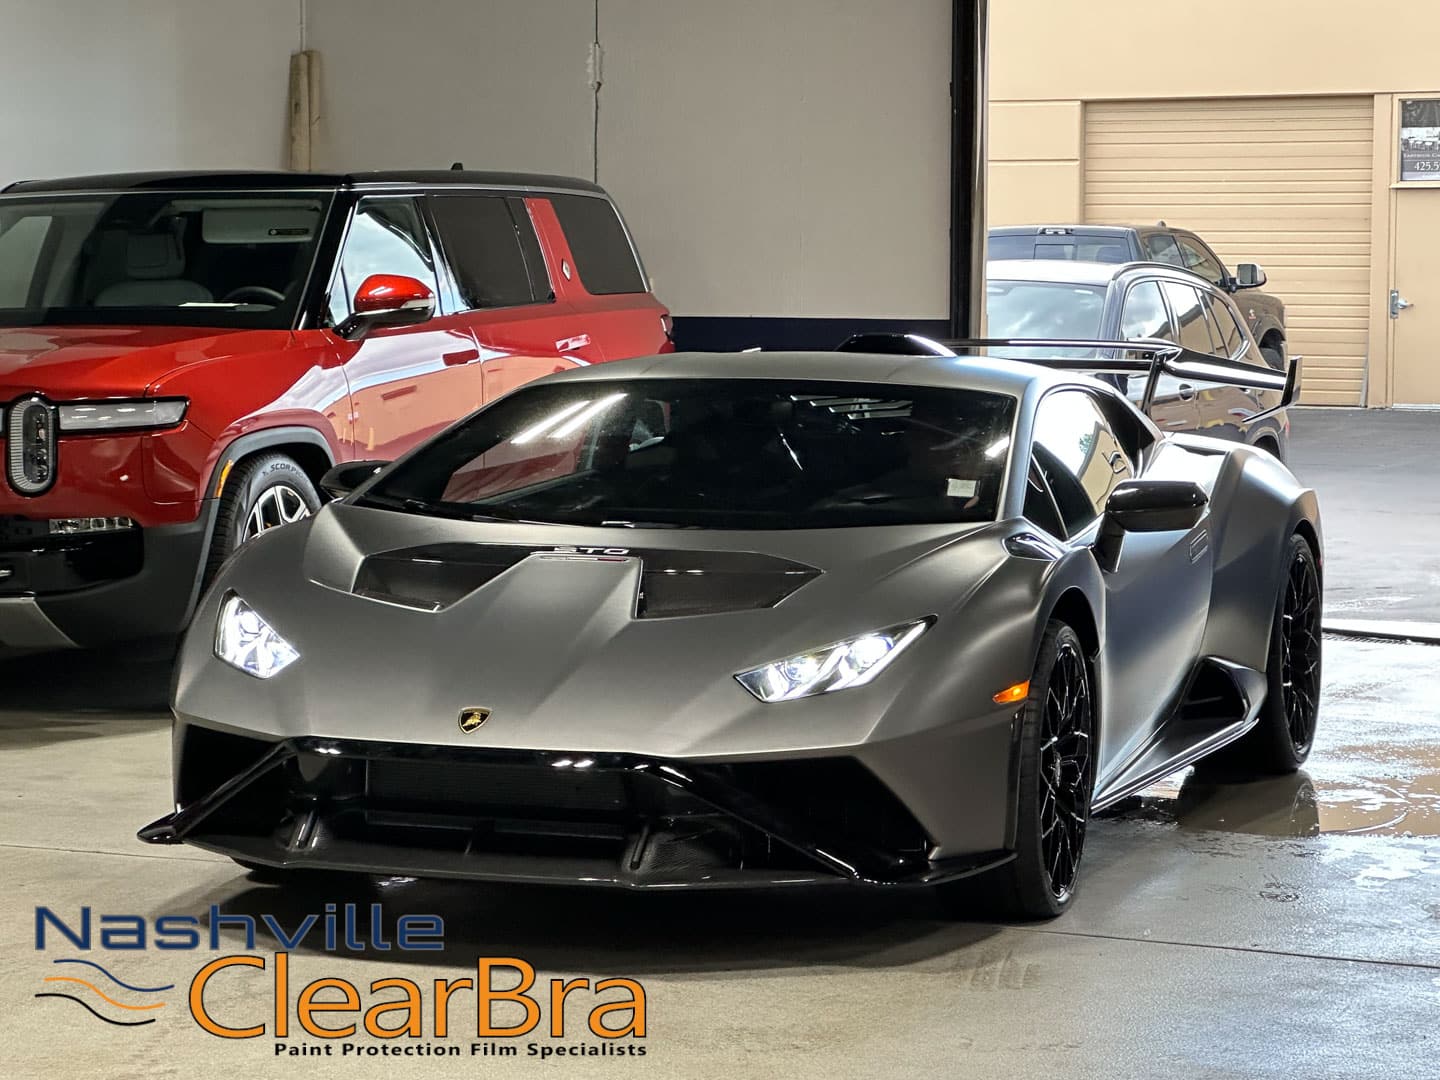 Xpel Paint Protection Film PPF Clear Bra Brentwood - Nashville ClearBra